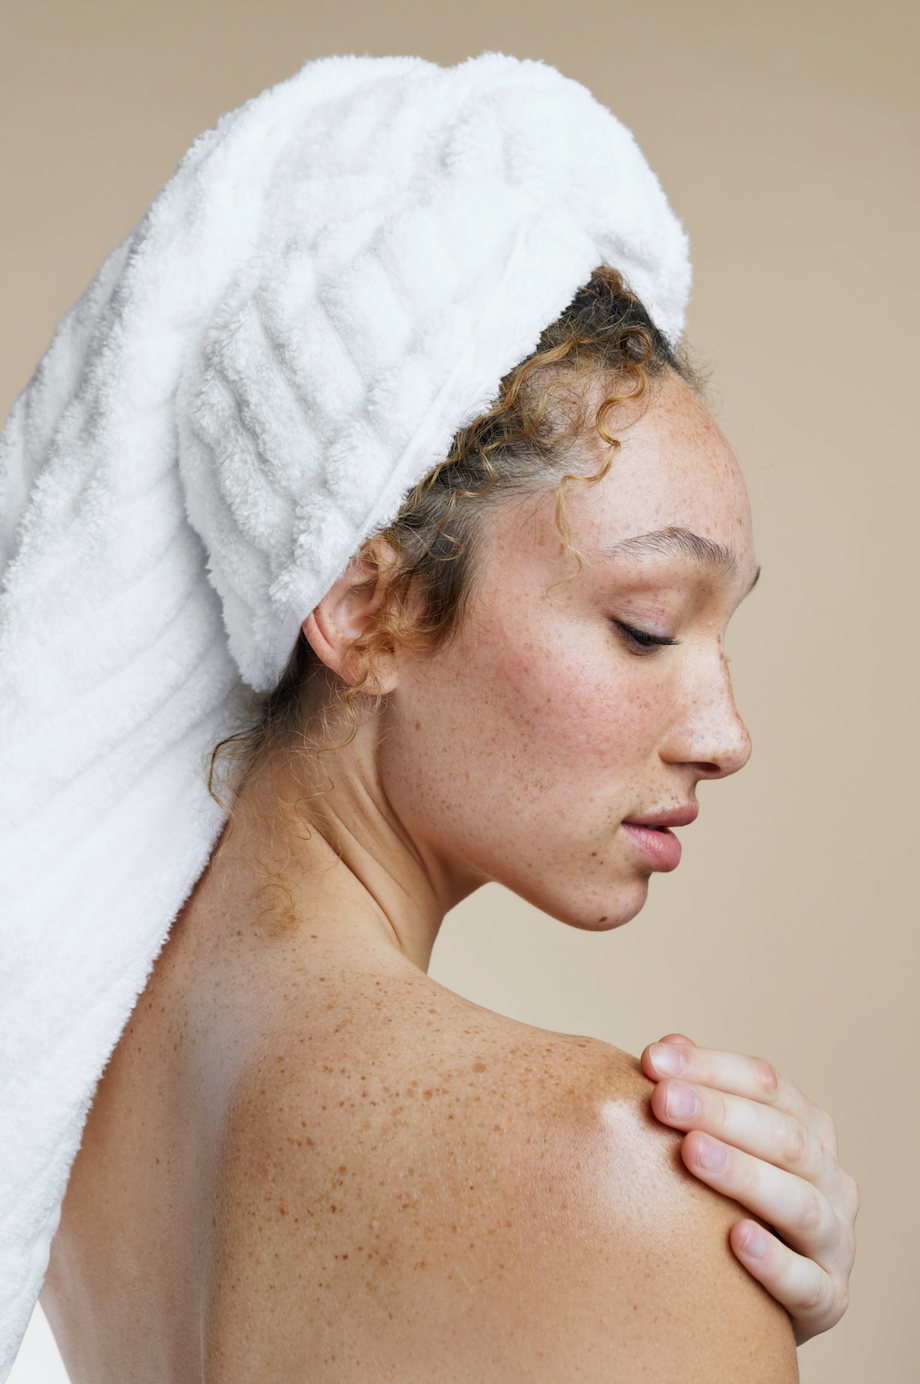 Skin care trends...Which ones are the real deal?